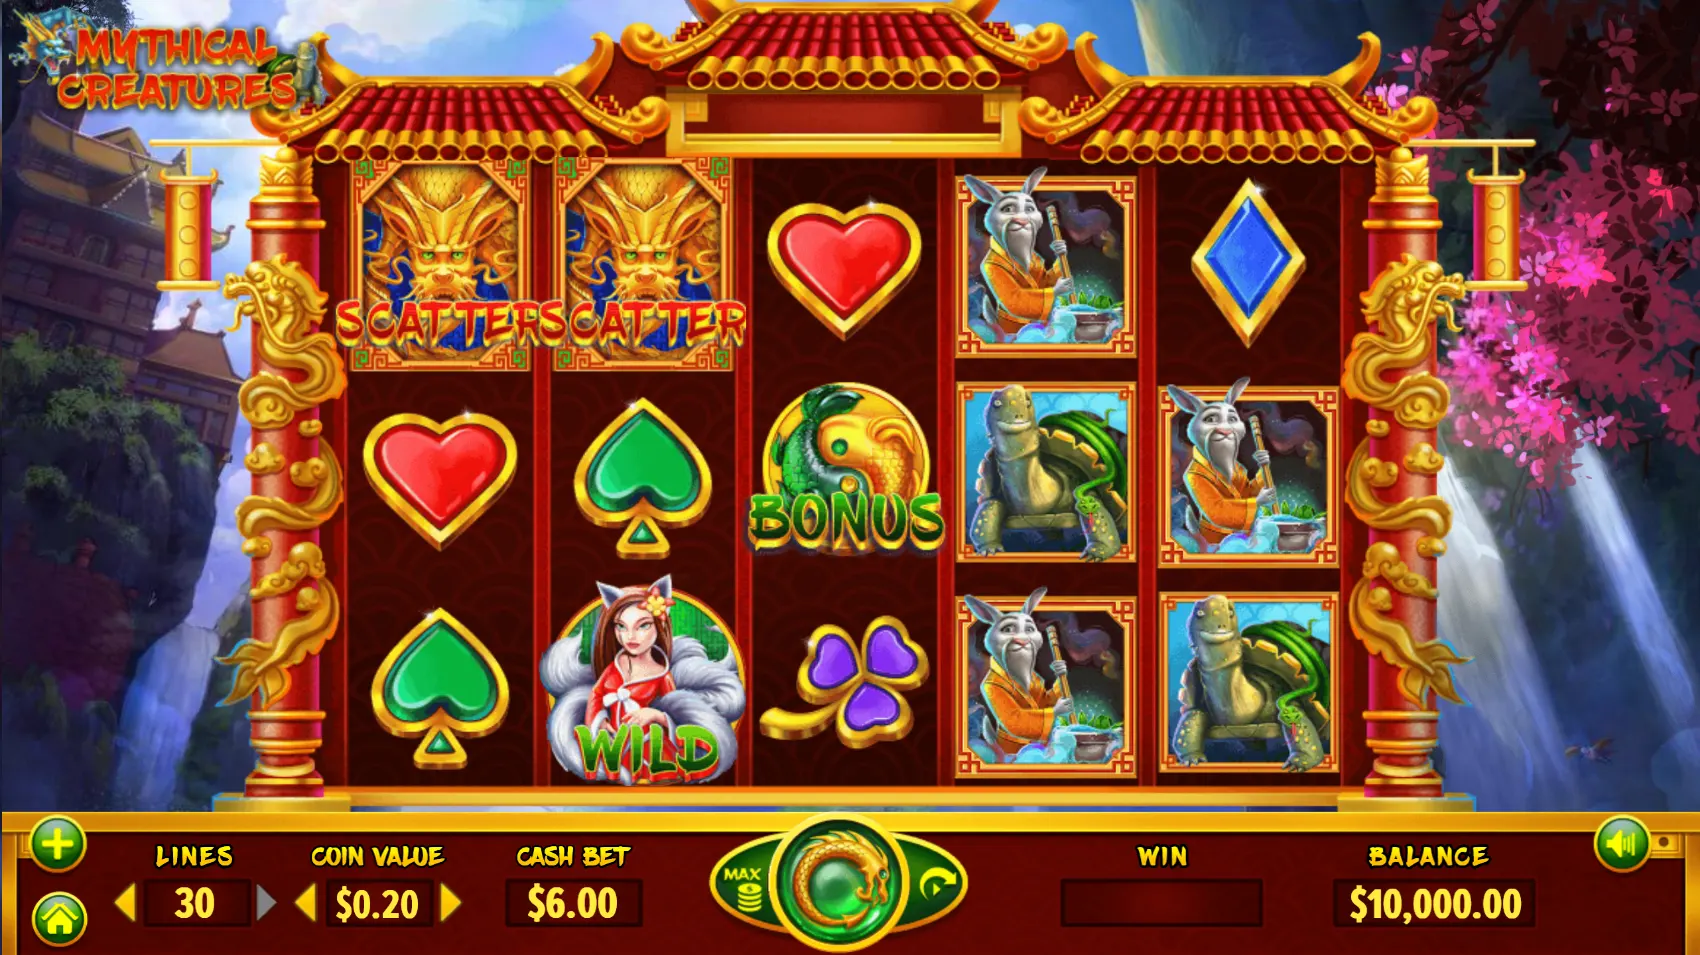 mythical creatures slot image